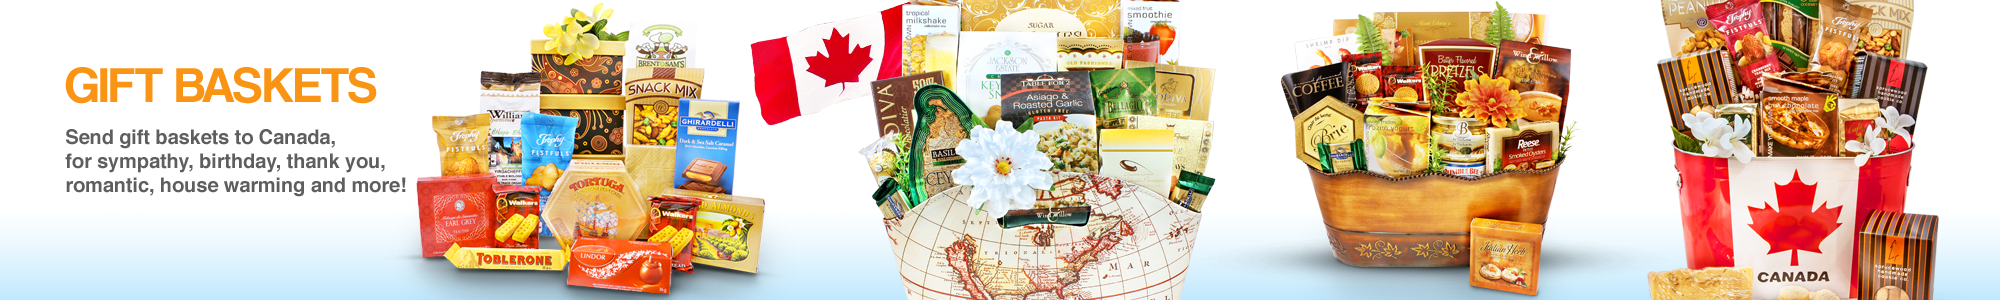 Gift Baskets Canada - Gourmet Gift Basket Store